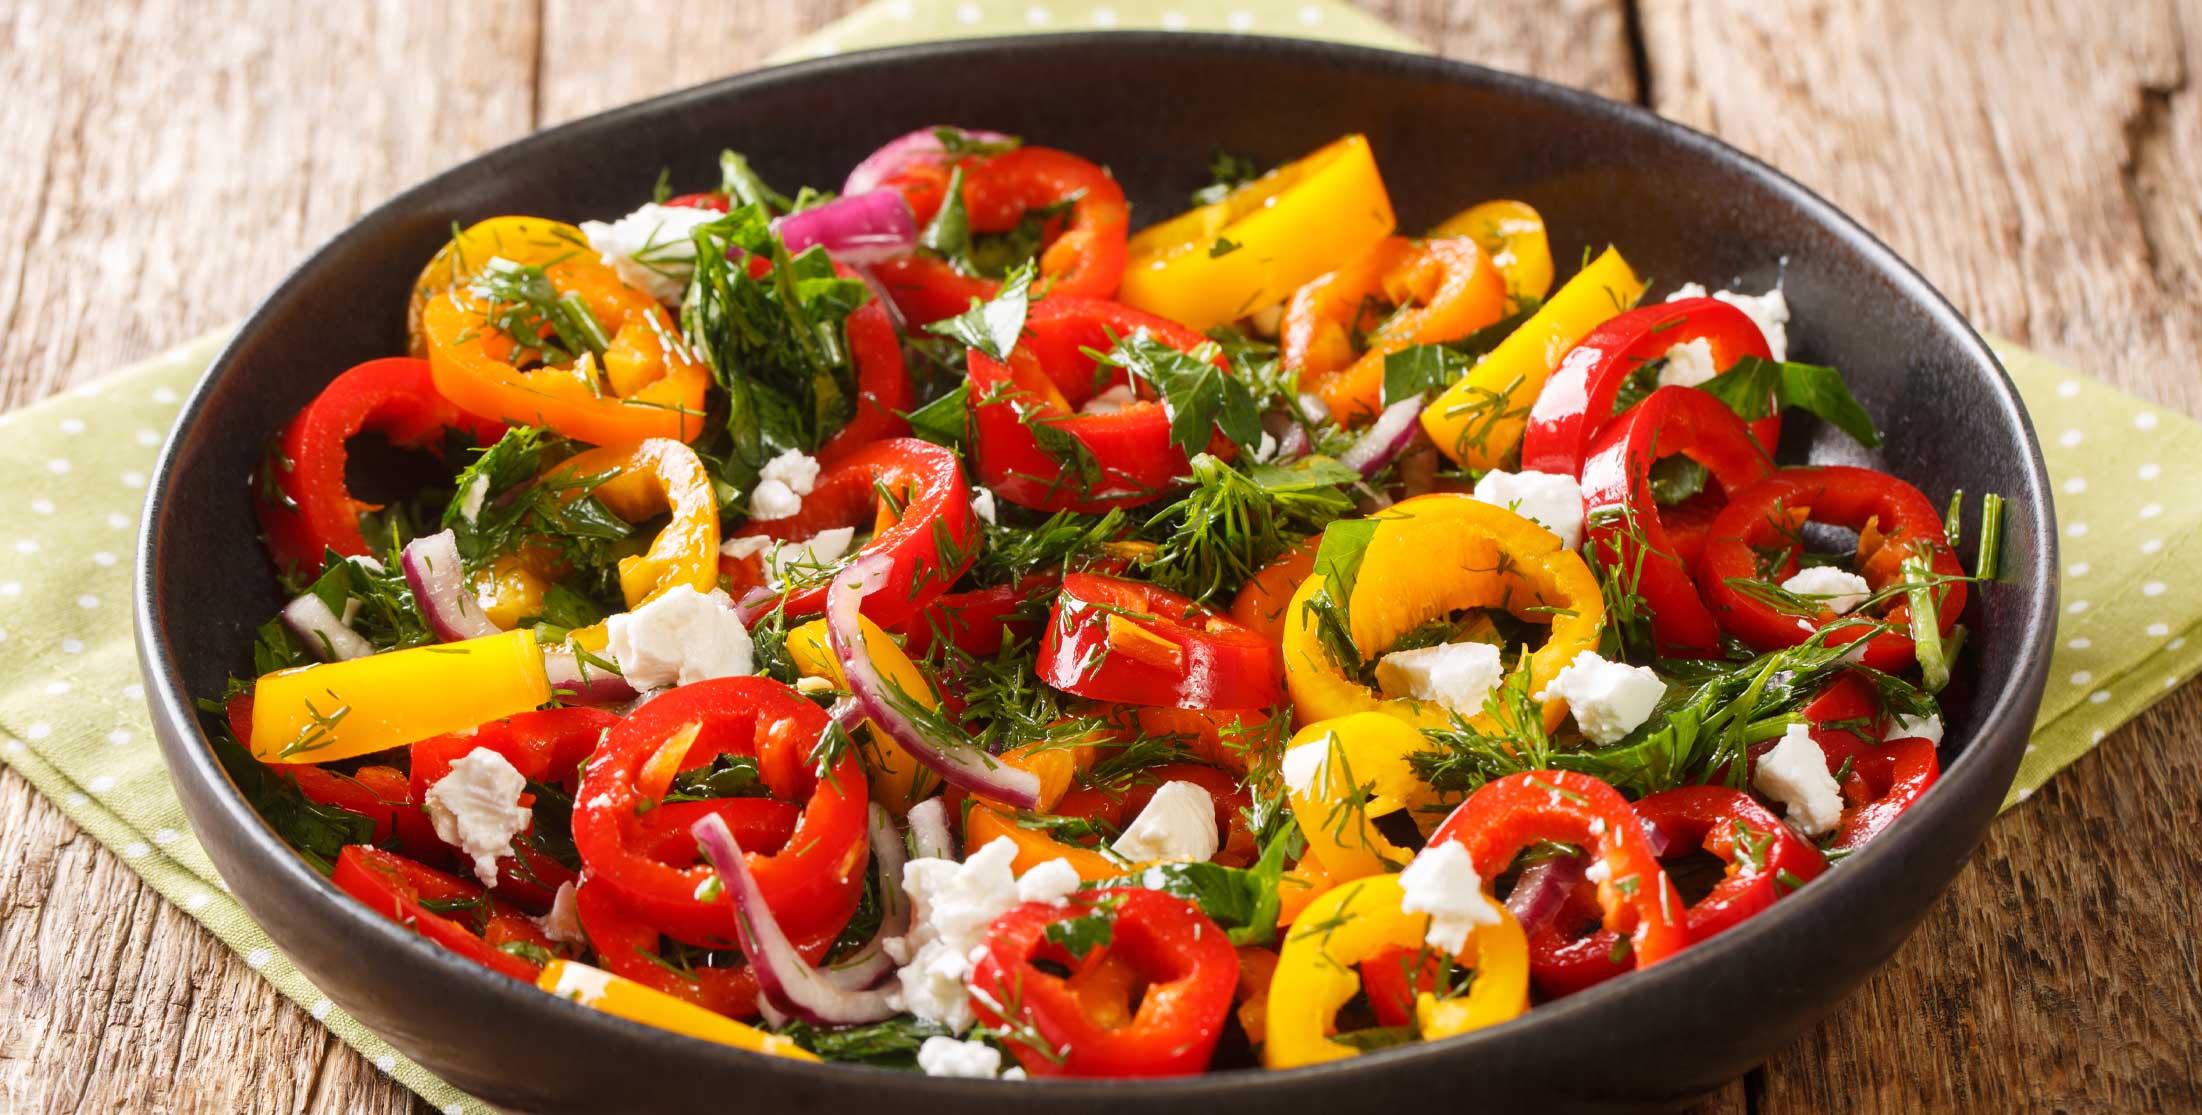 Prime Time Sweet Mini-Pepper Salad with Onions, Herbs and Feta